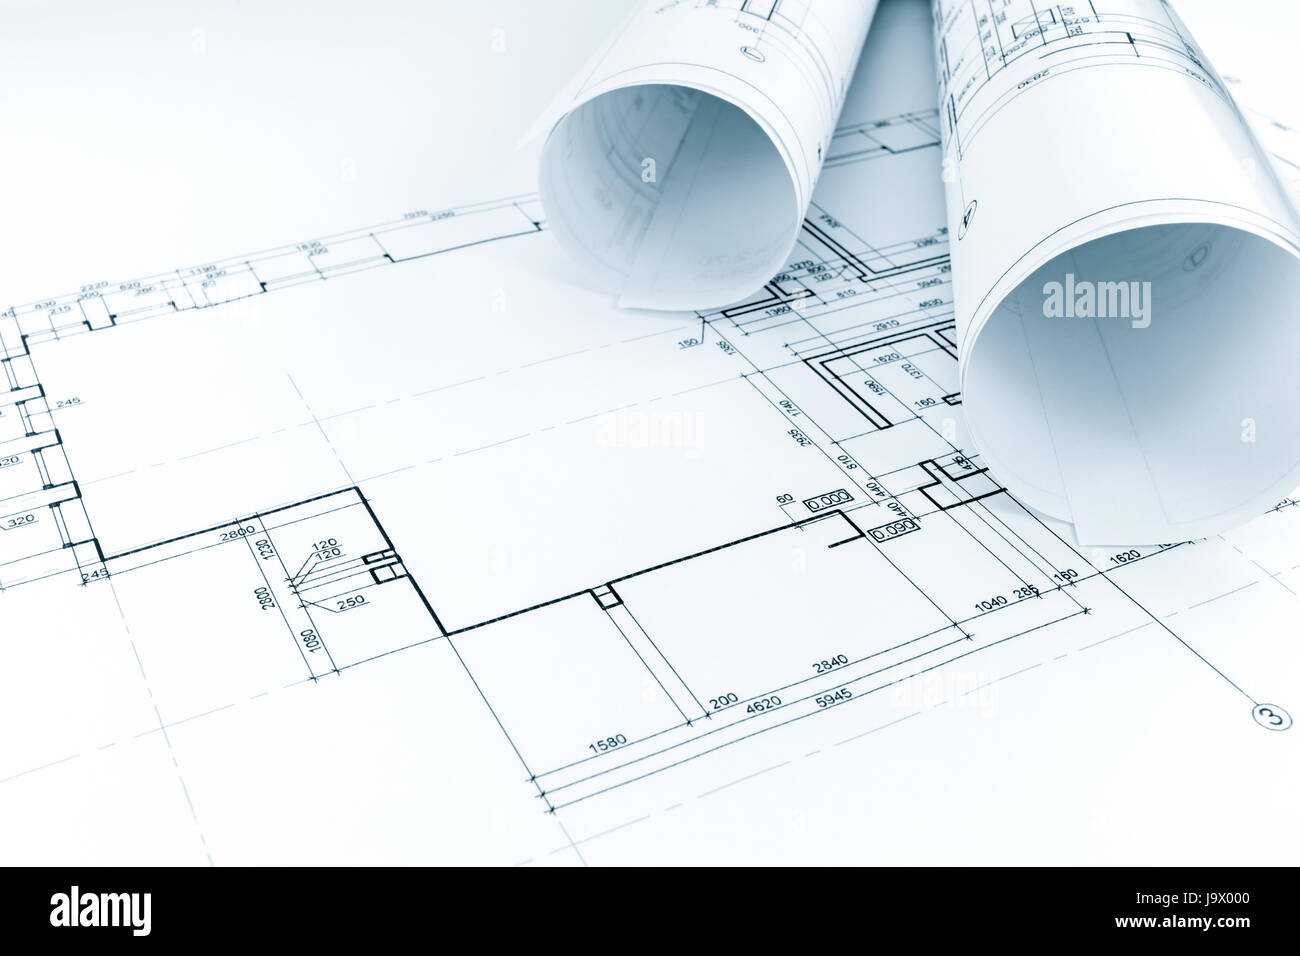 floor plan drawing with rolls of architectural blueprints Stock Photo